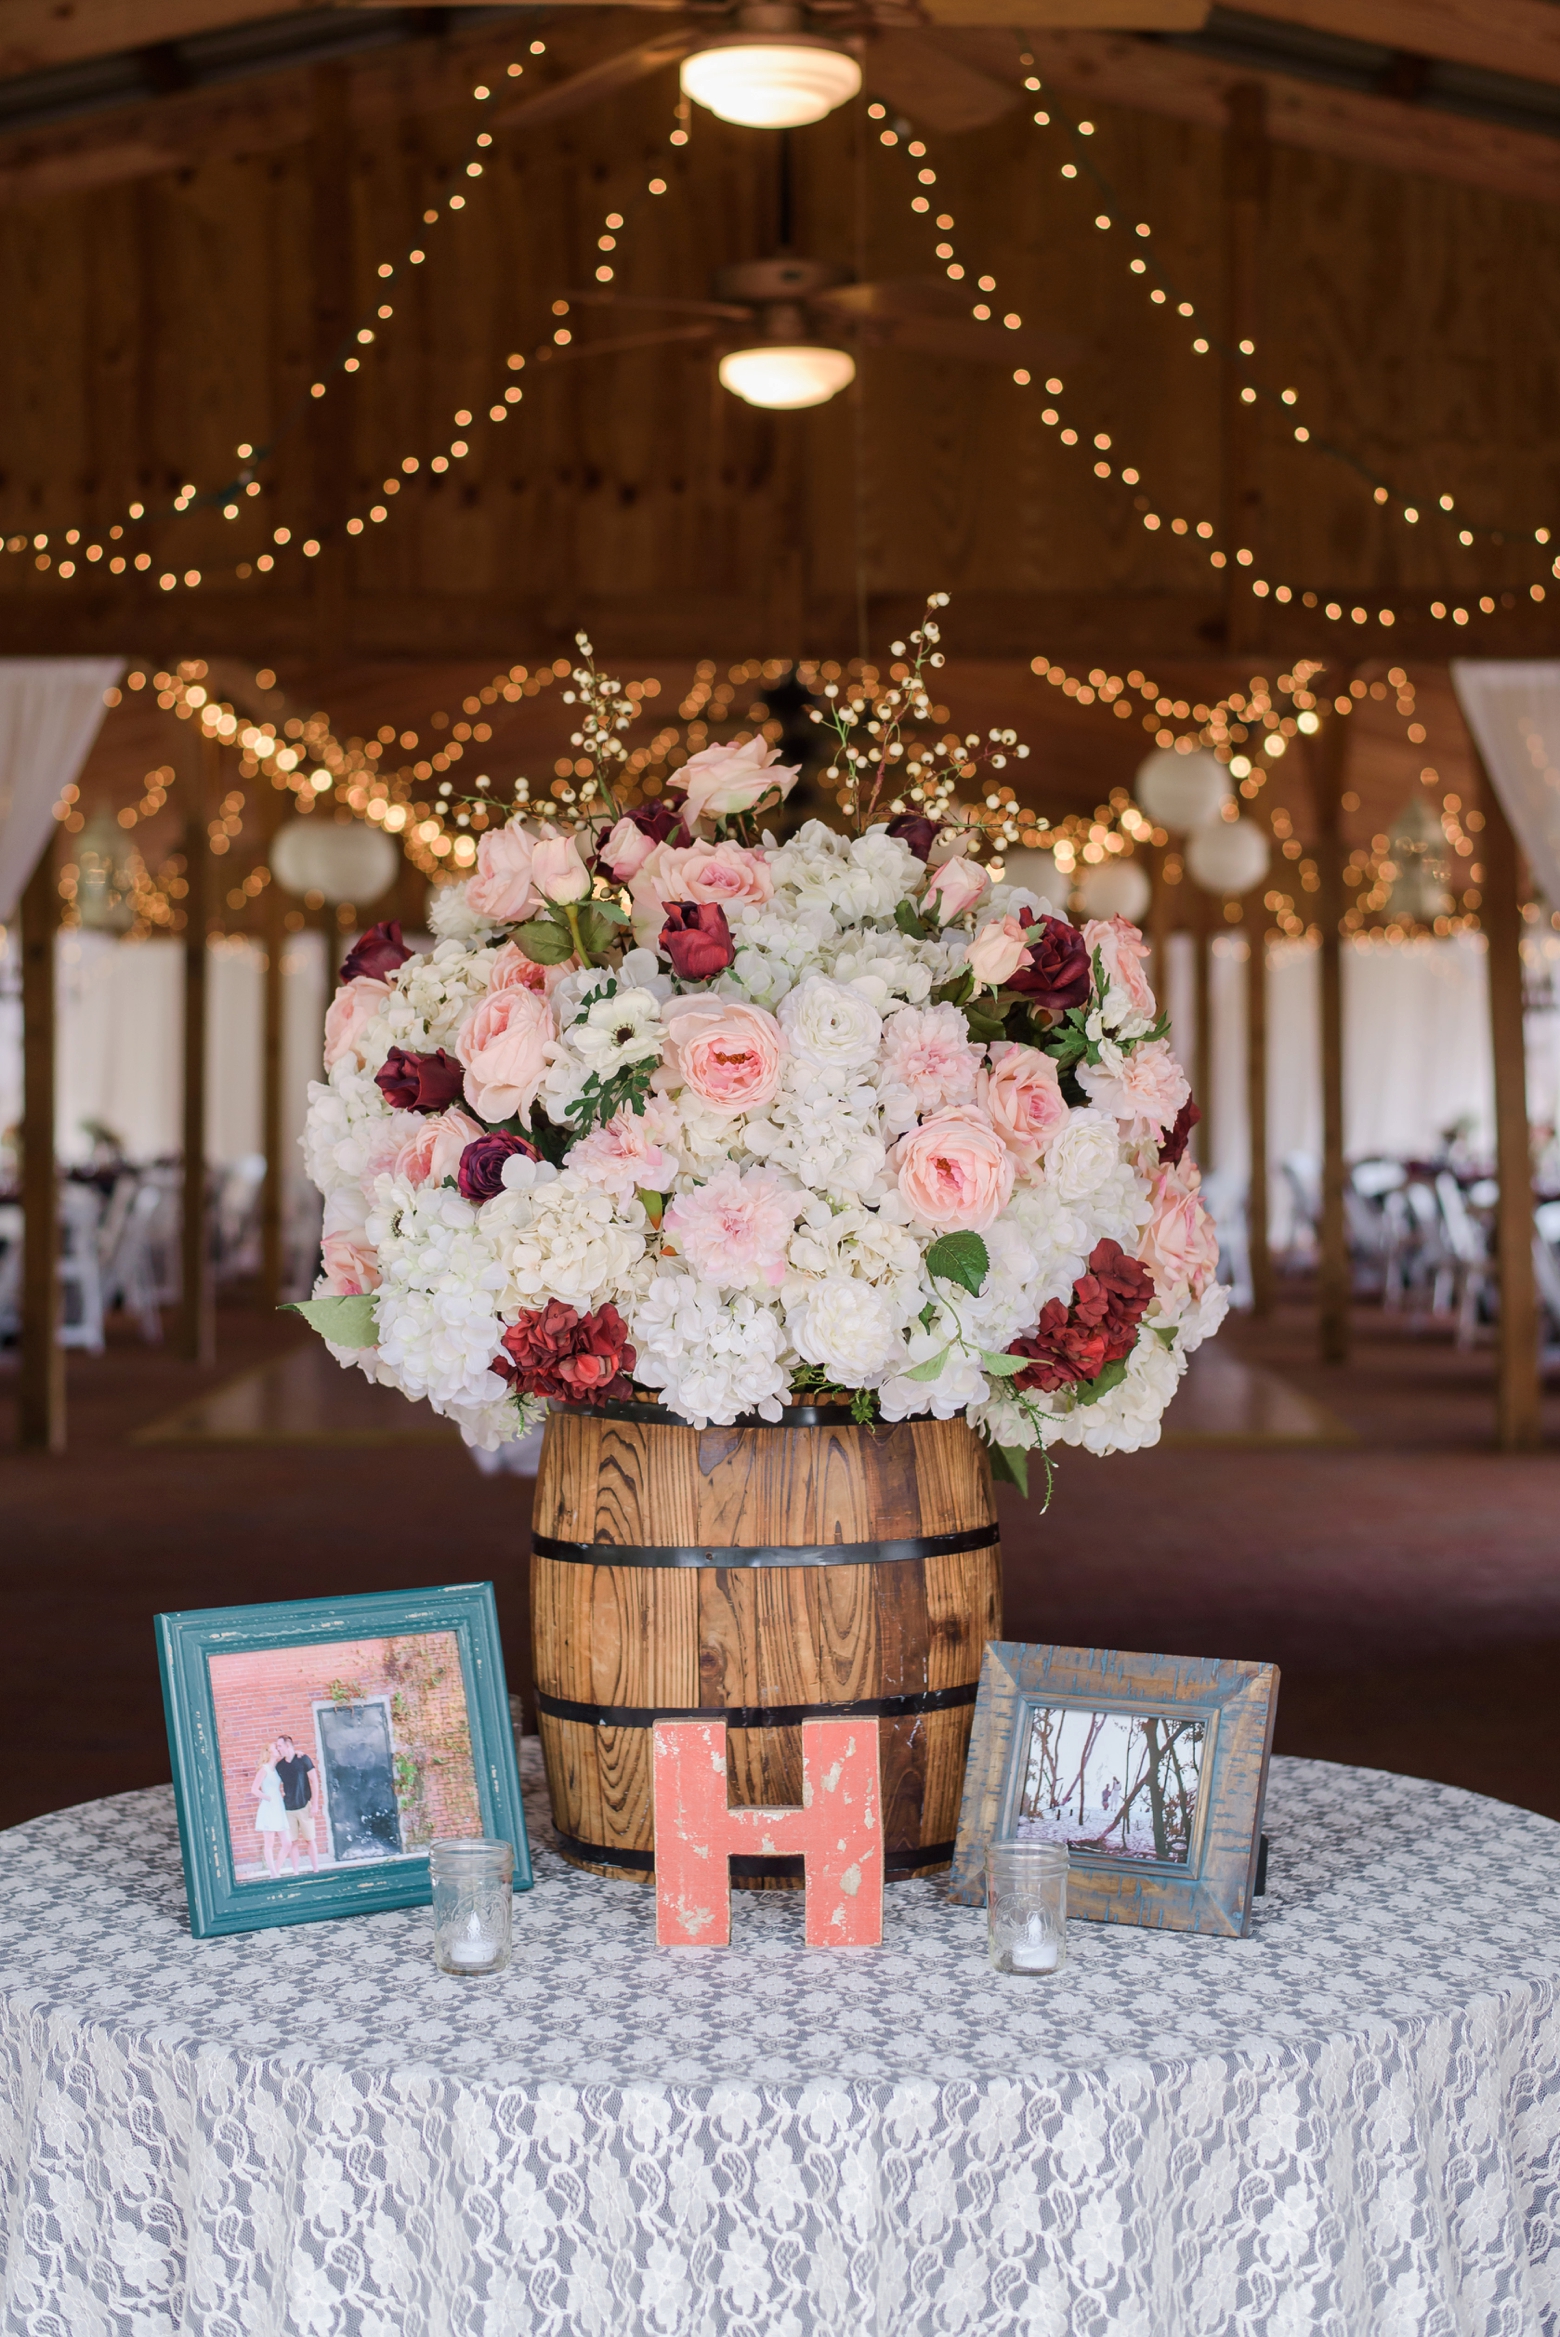 The welcome table at the entrance of the barn with a large floral arrangement and candles